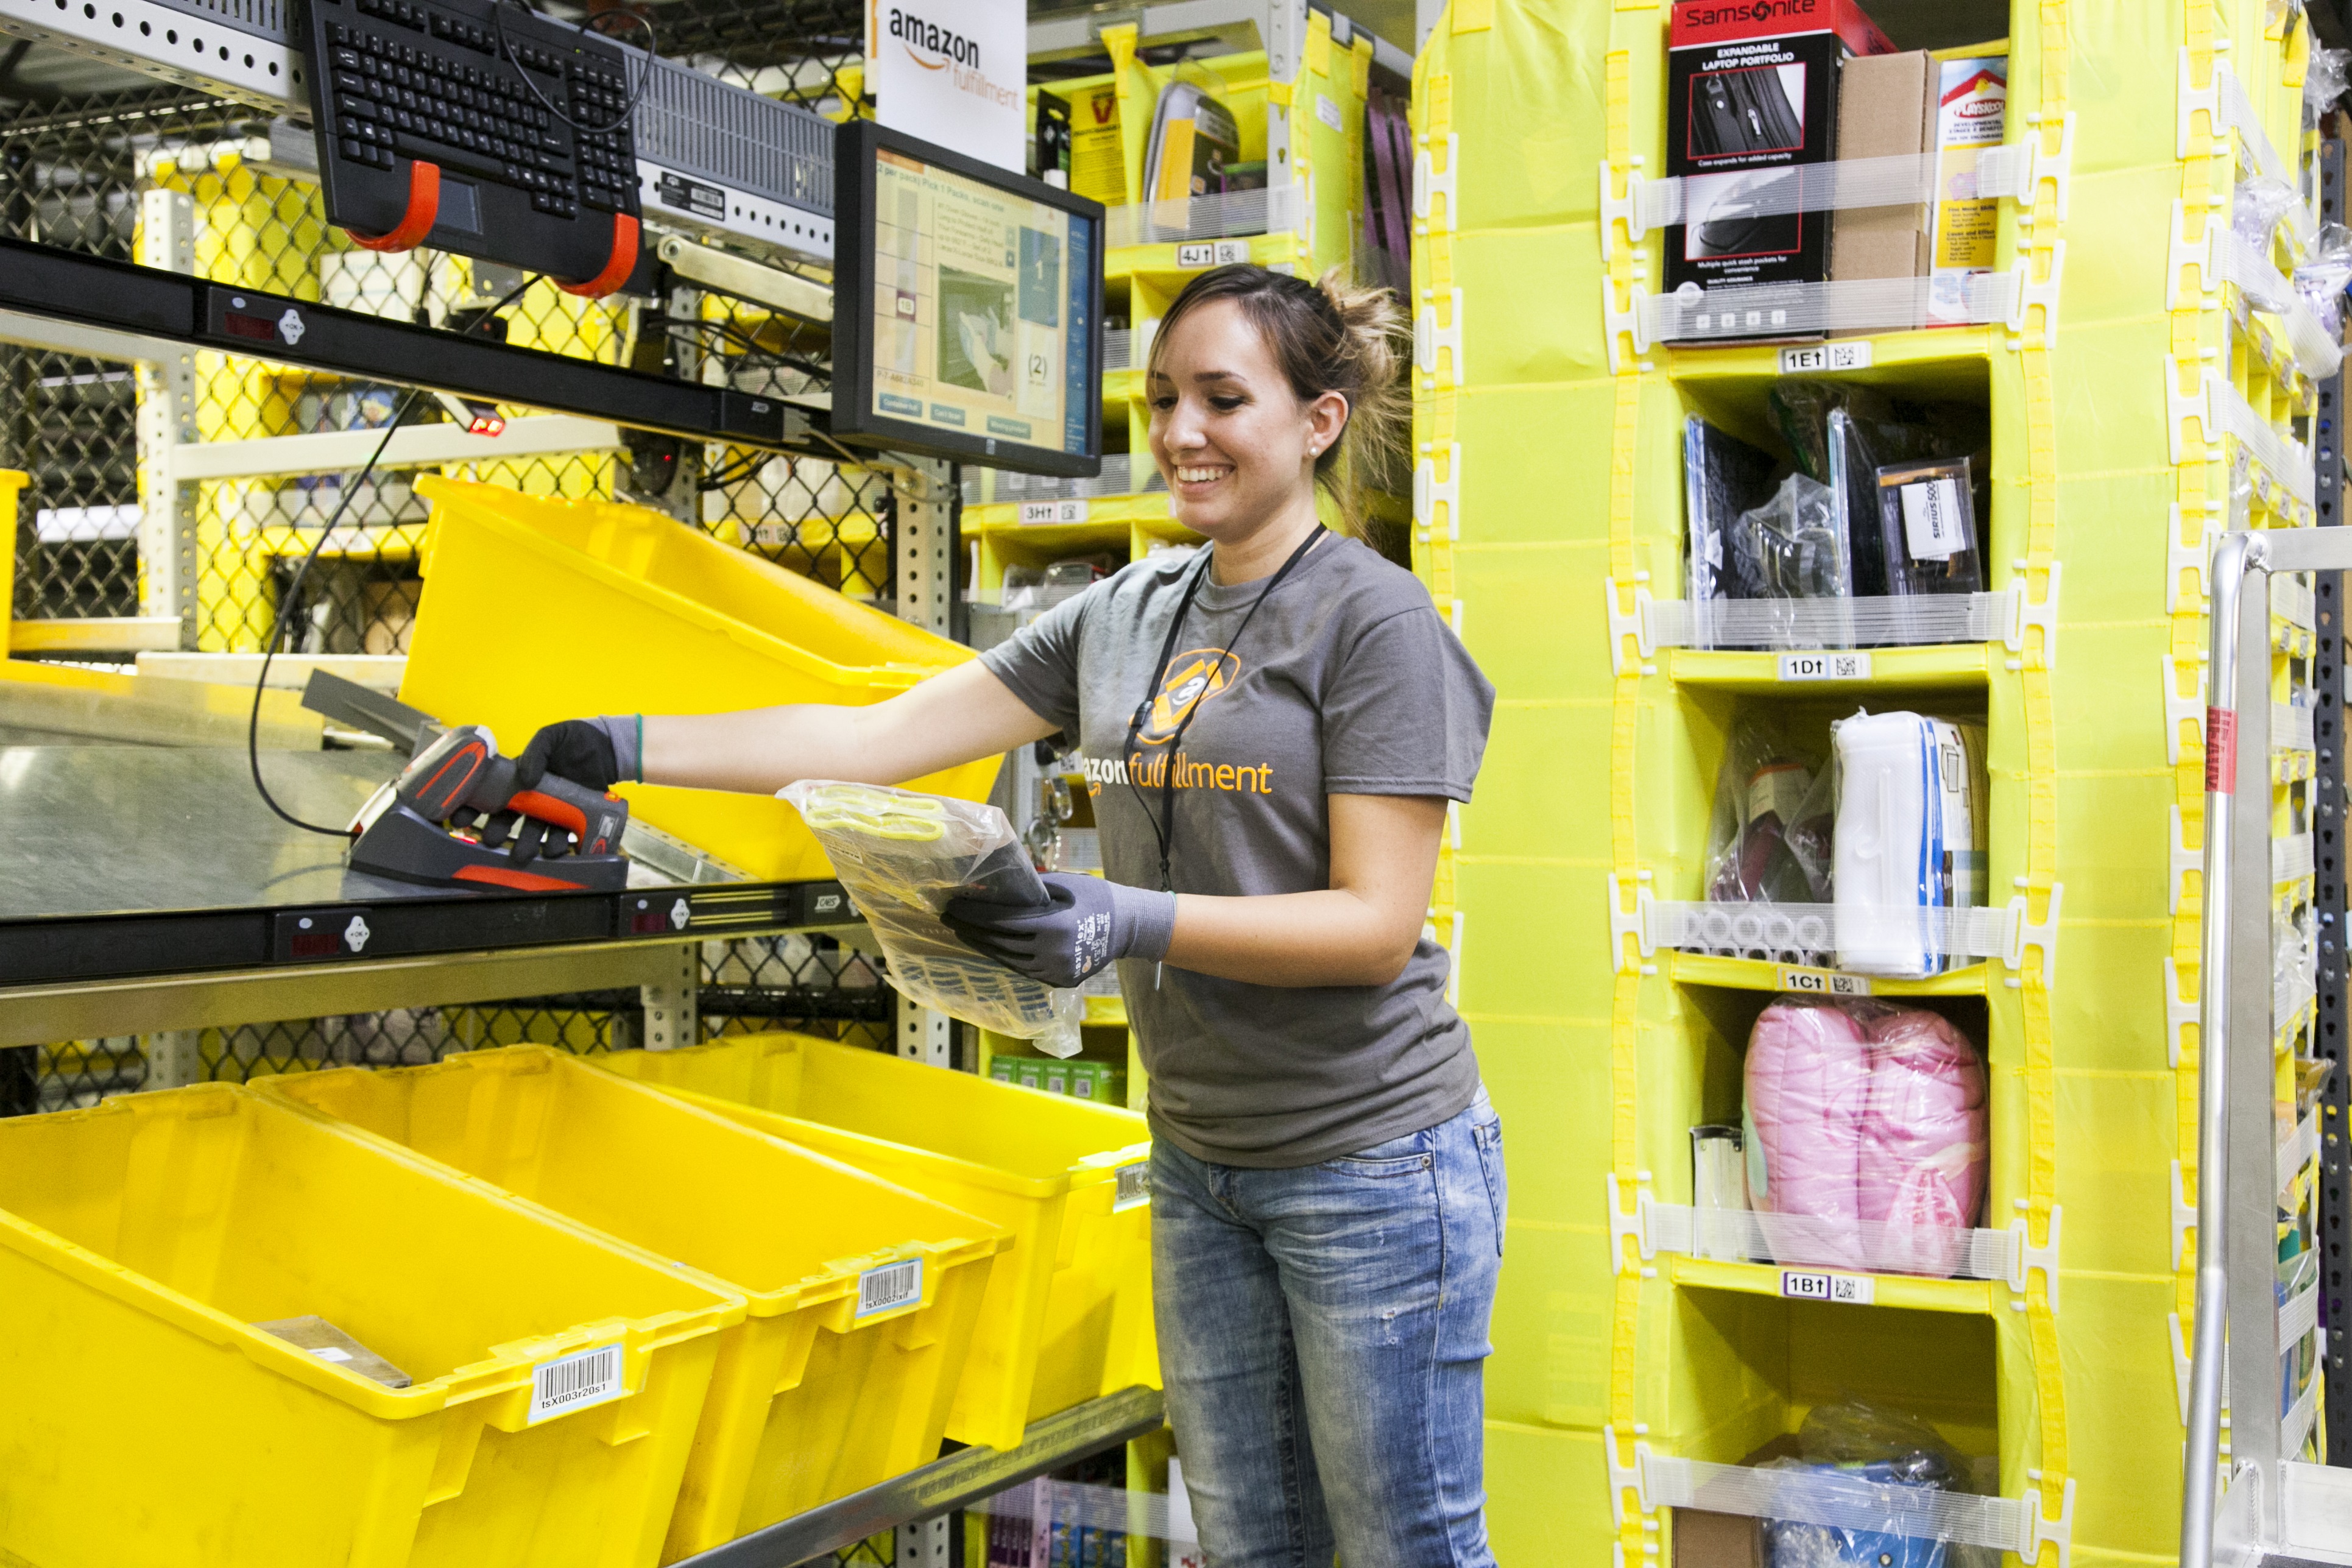 Employee at an Amazon Eighth Generation Fulfillment Center